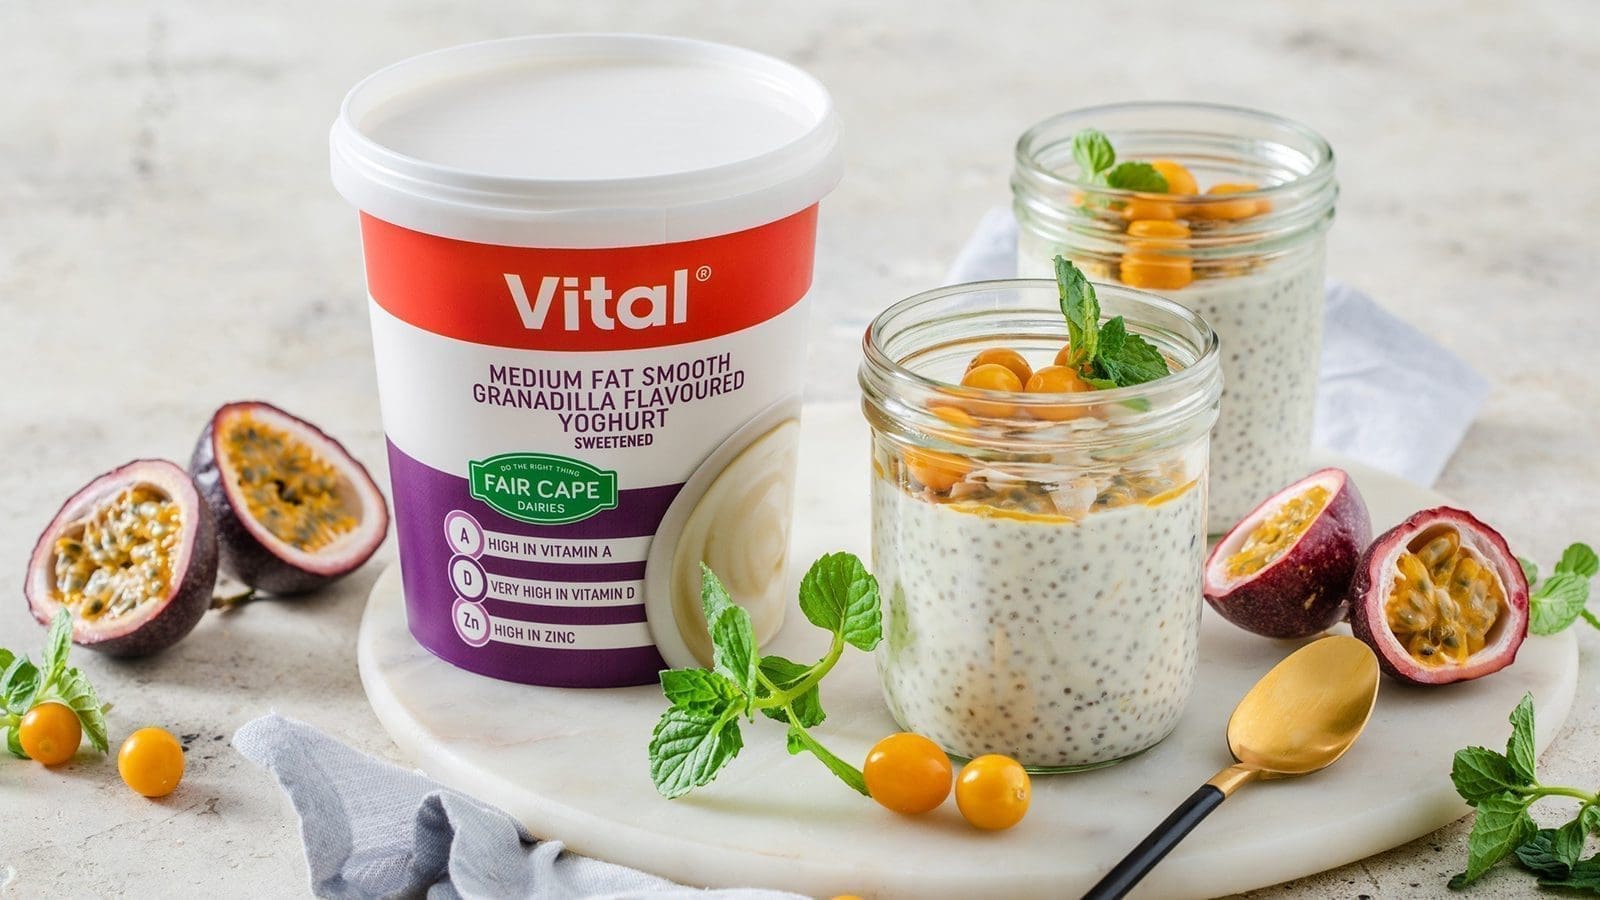 Exeo Capital acquires Vital Health Foods extending its investment in functional, convenience foods